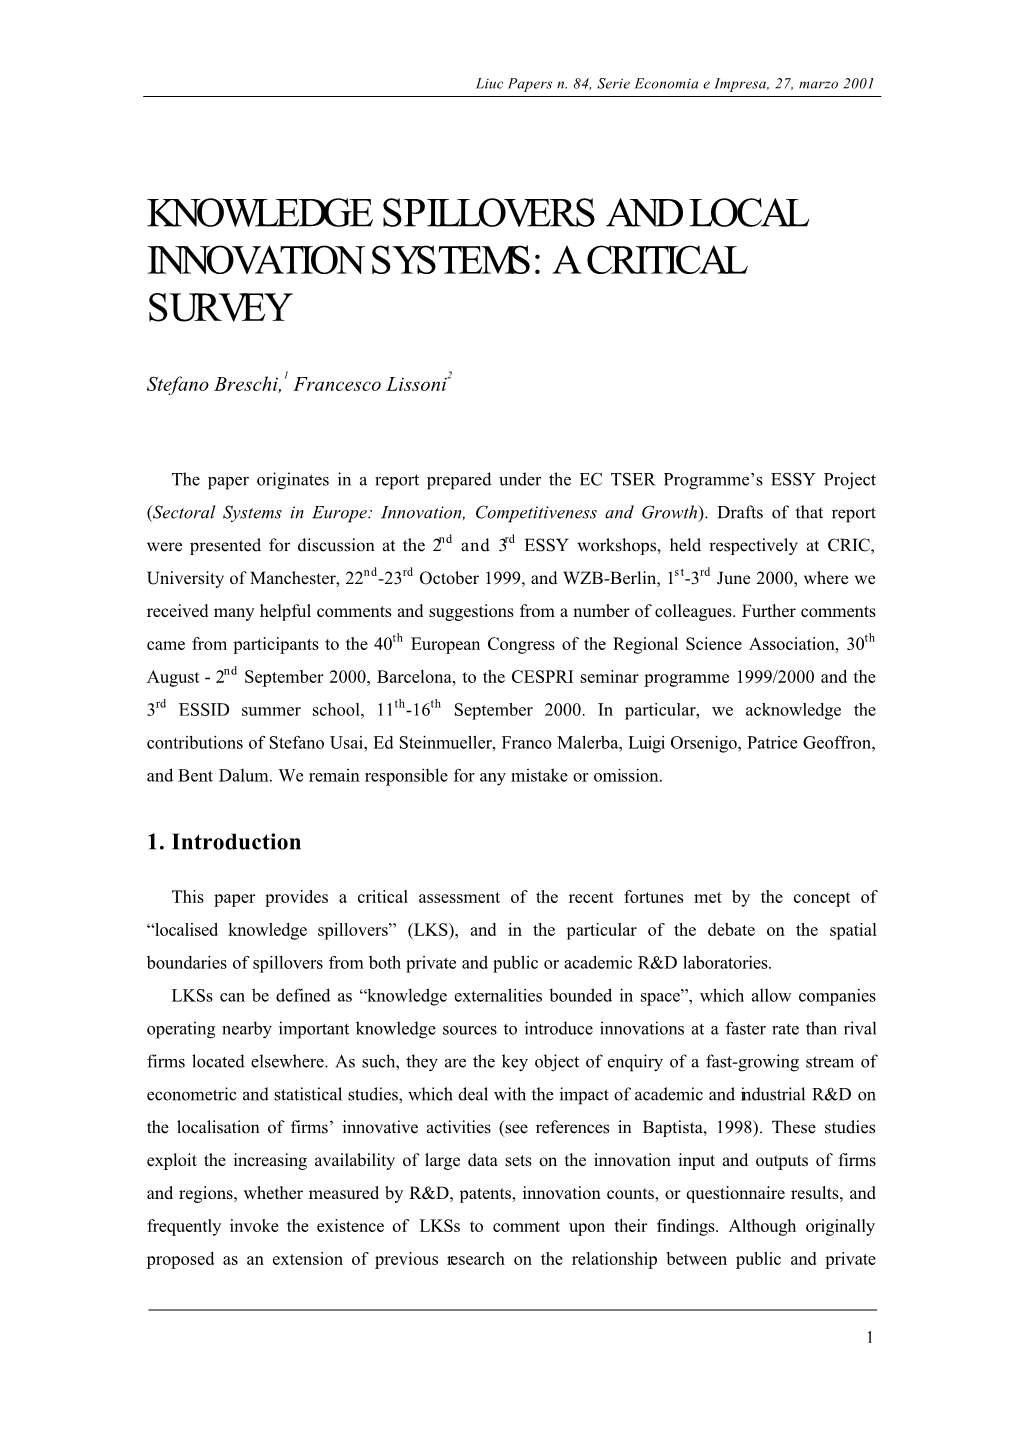 Knowledge Spillovers and Local Innovation Systems: a Critical Survey